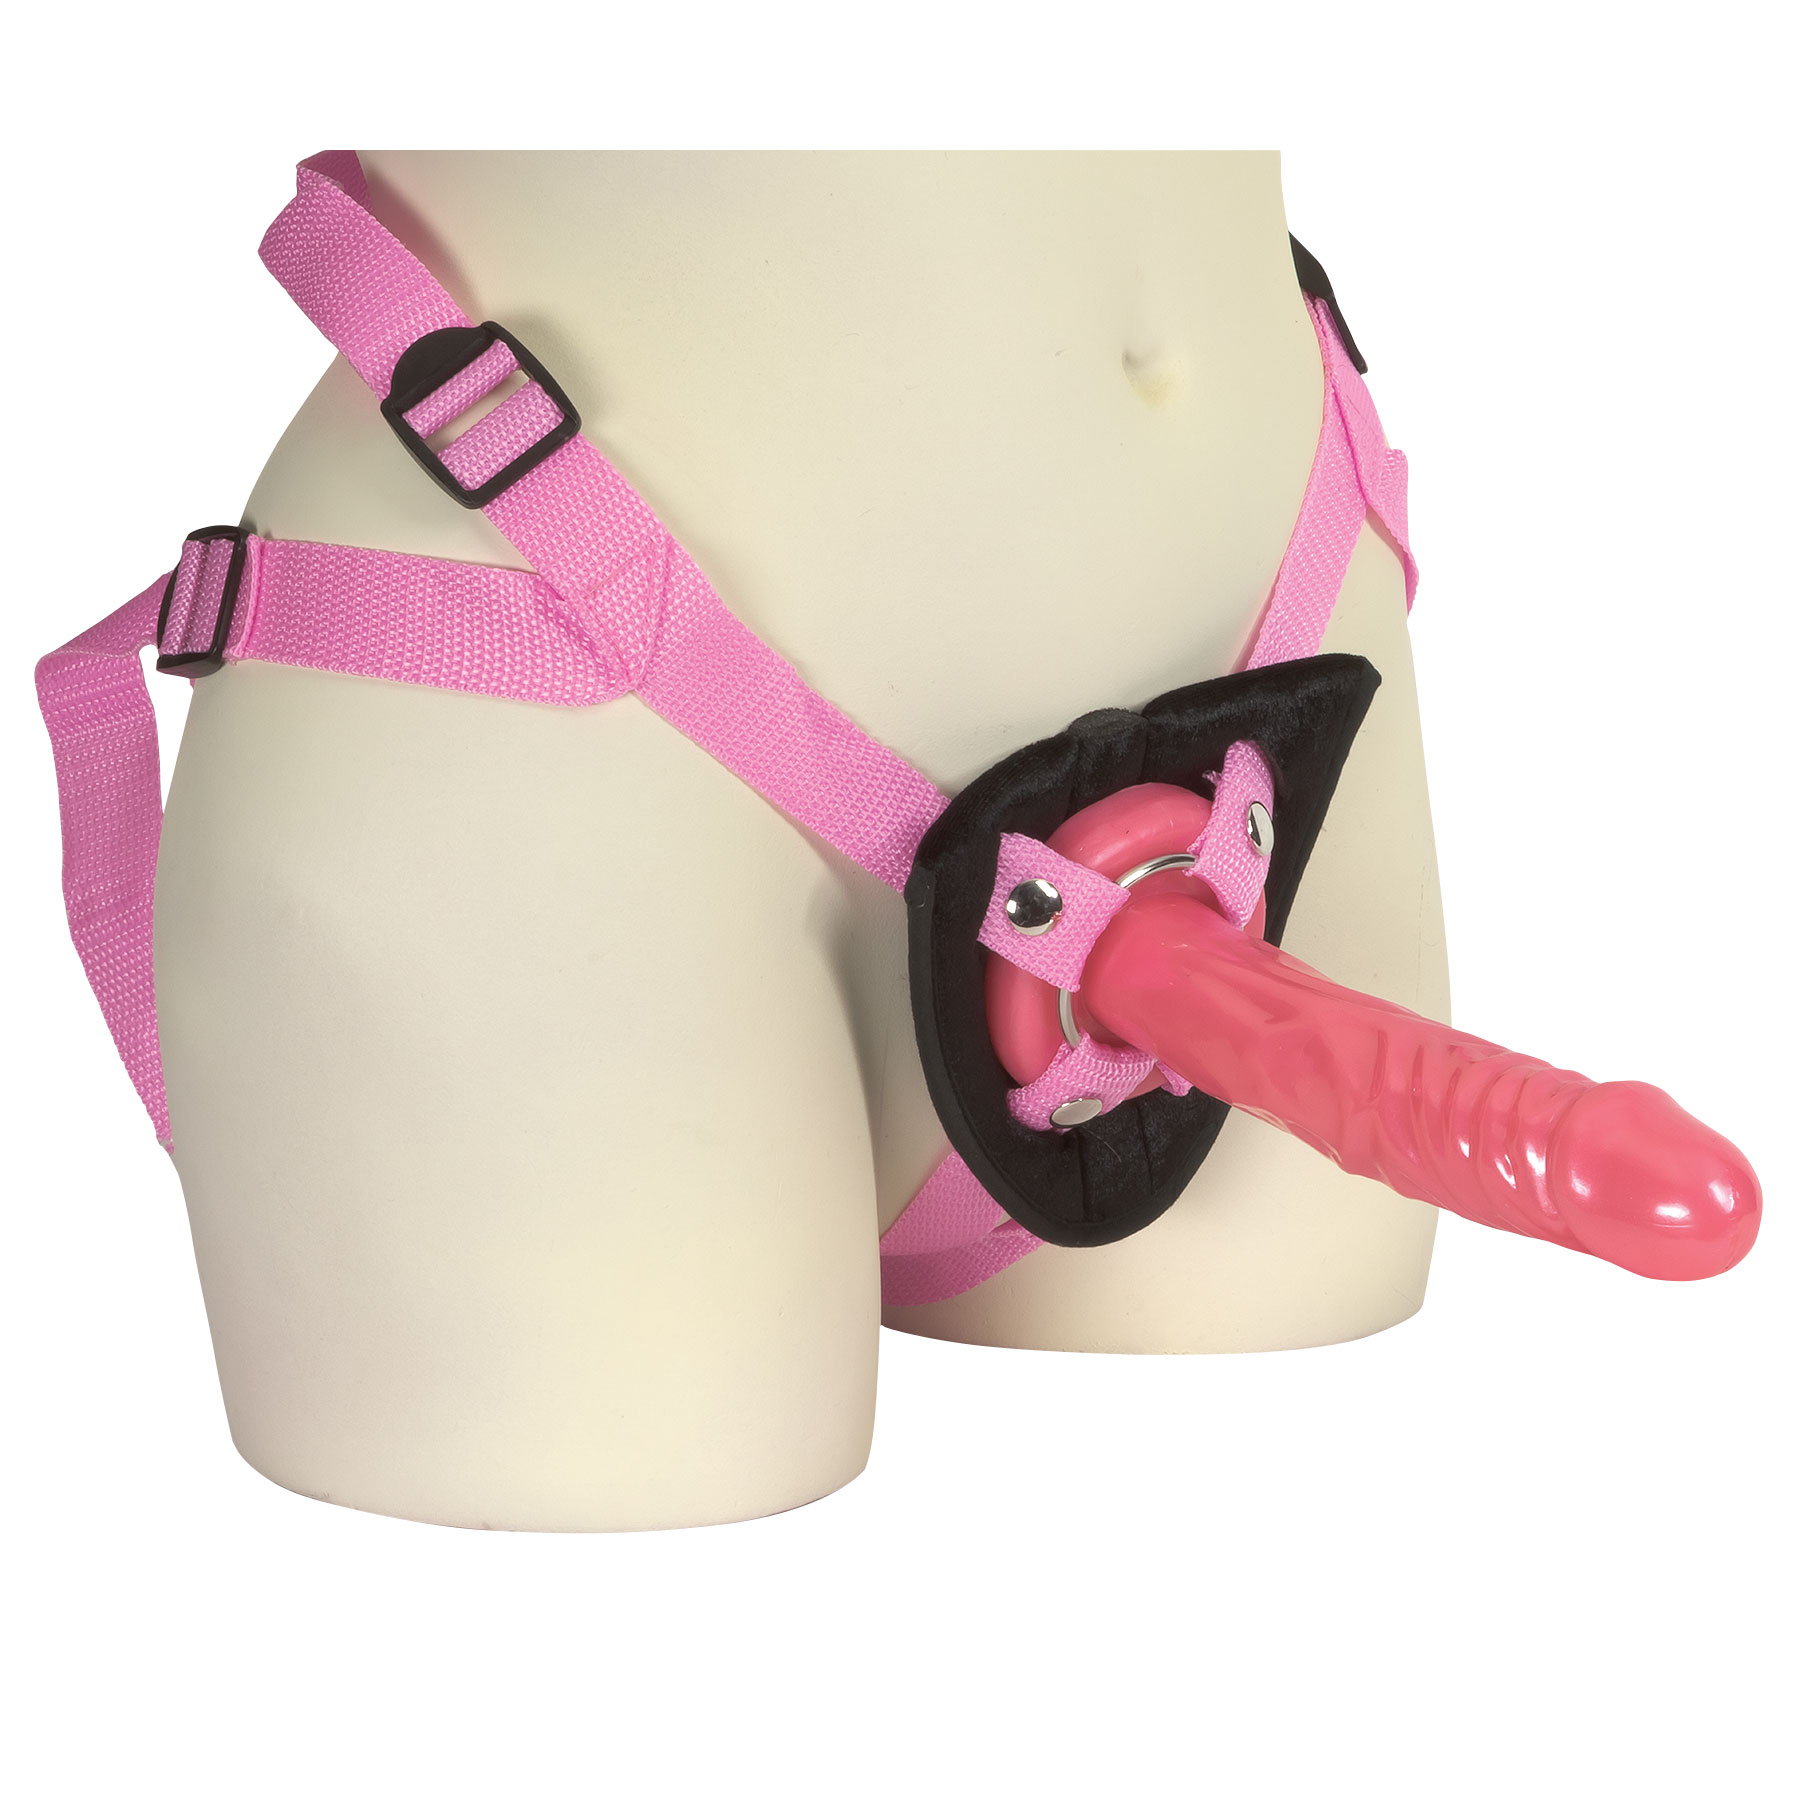 Pink Harness With Stud pic